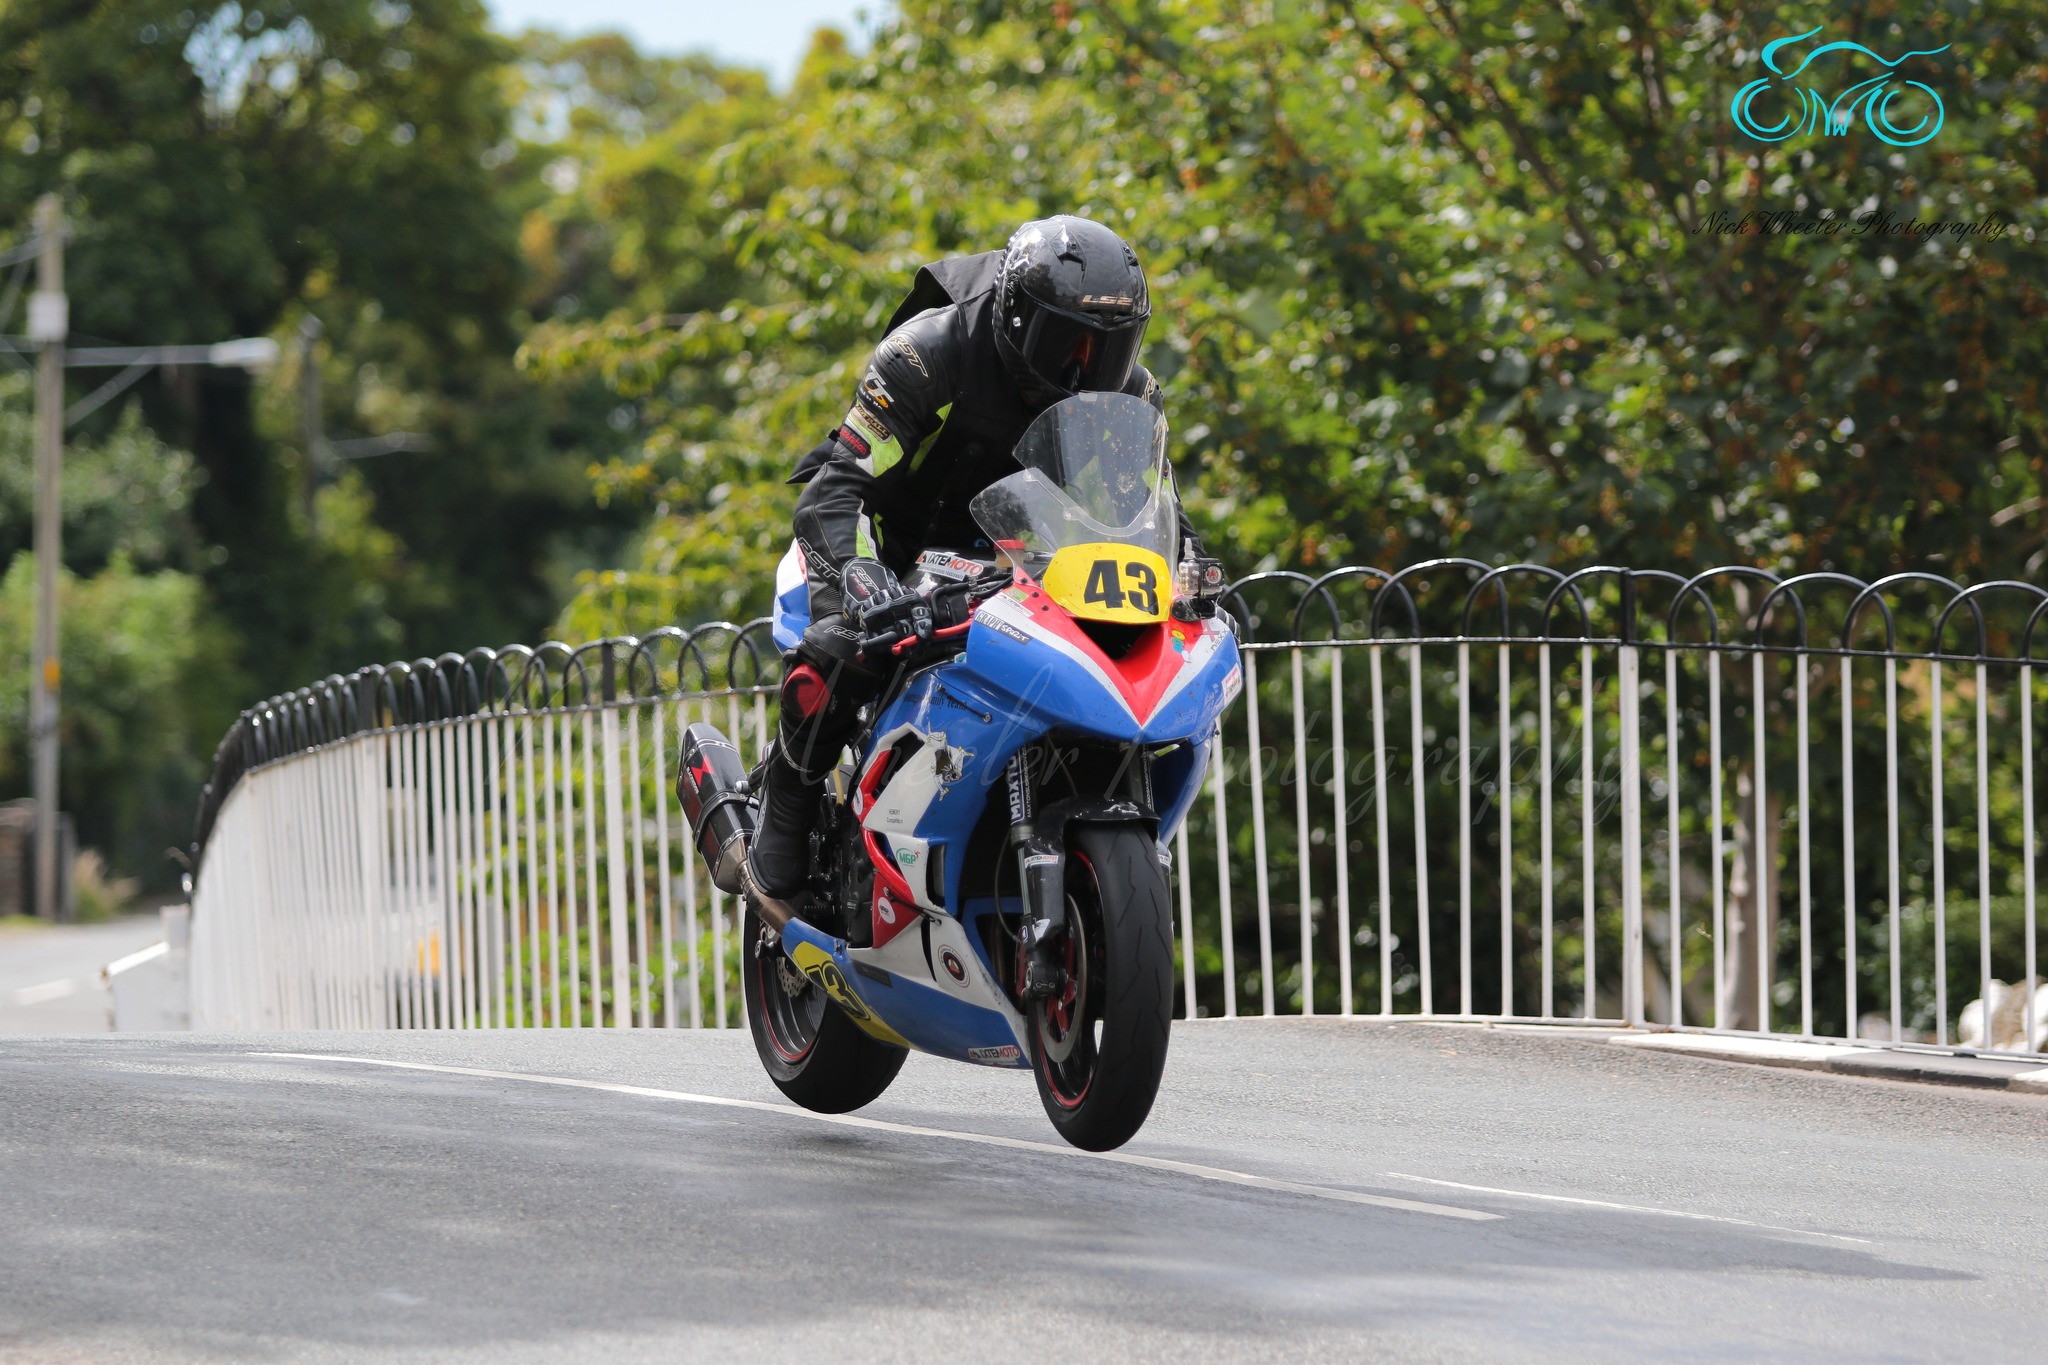 Vuillermet’s Manx GP Ambitions On Hold